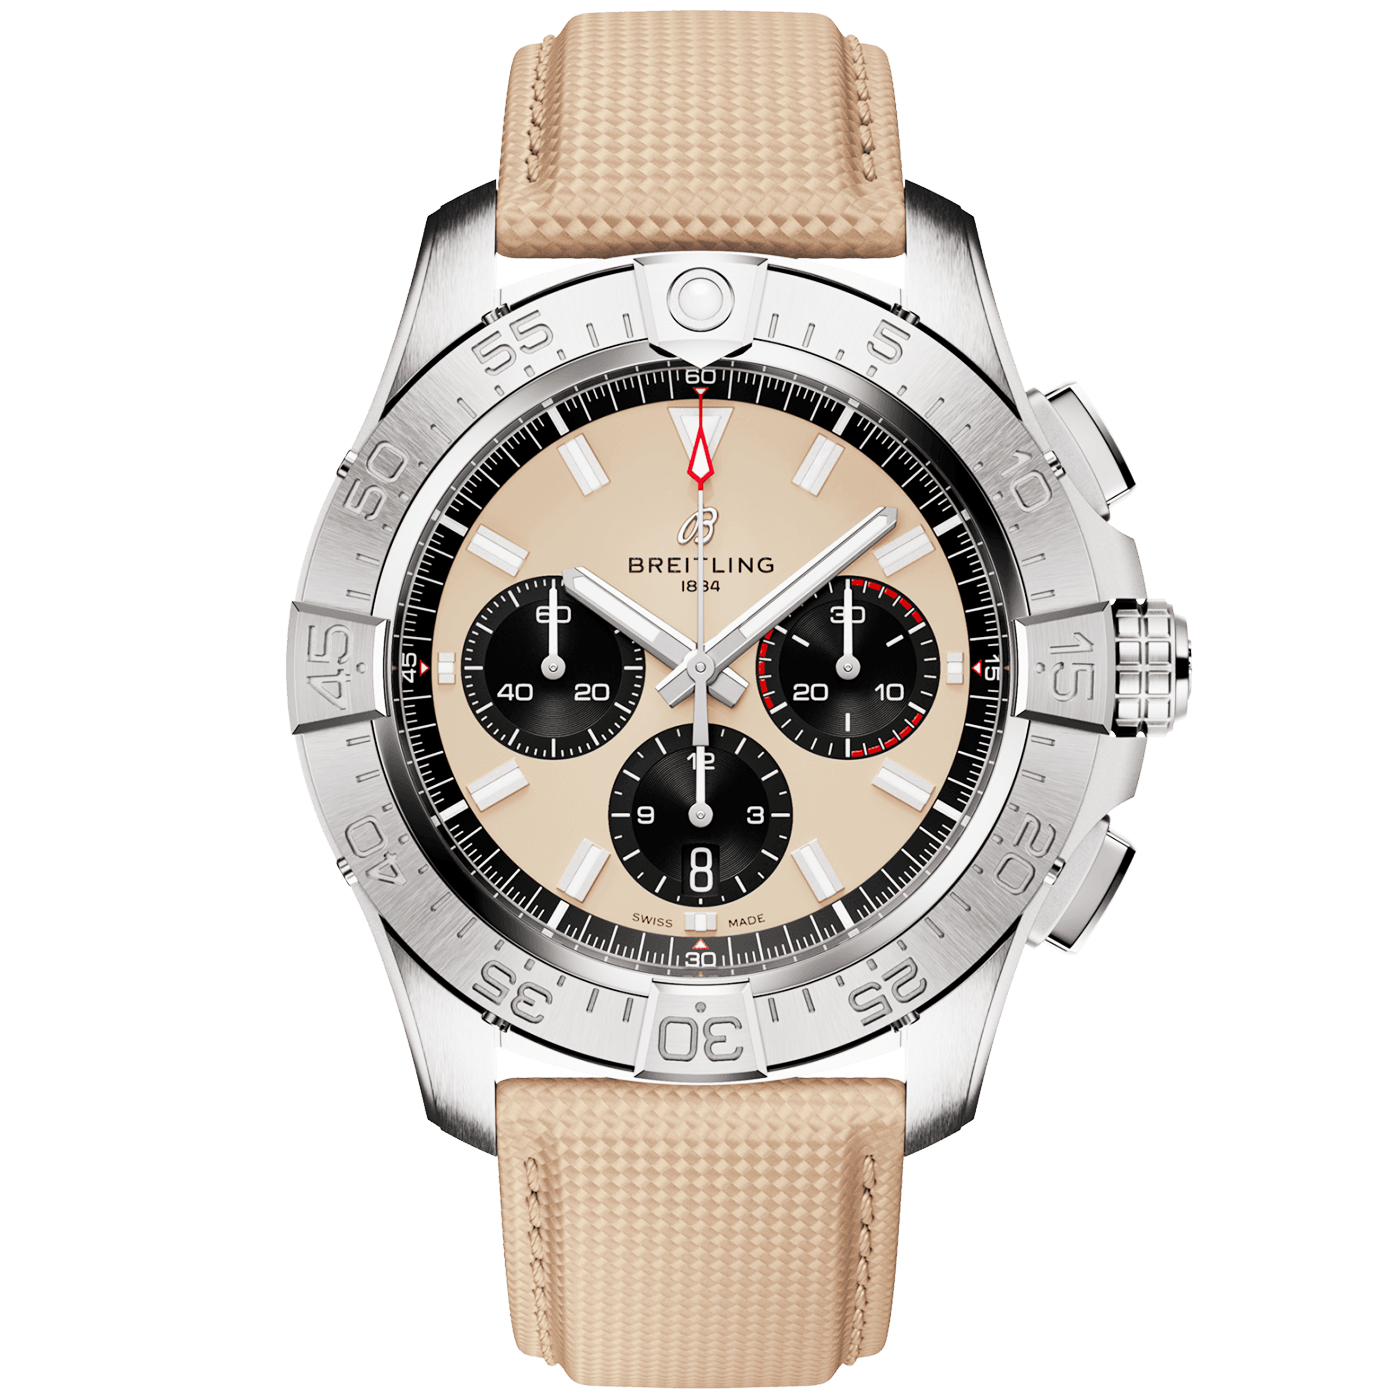 Avenger 44mm Sand Dial Automatic Chronograph Strap Watch